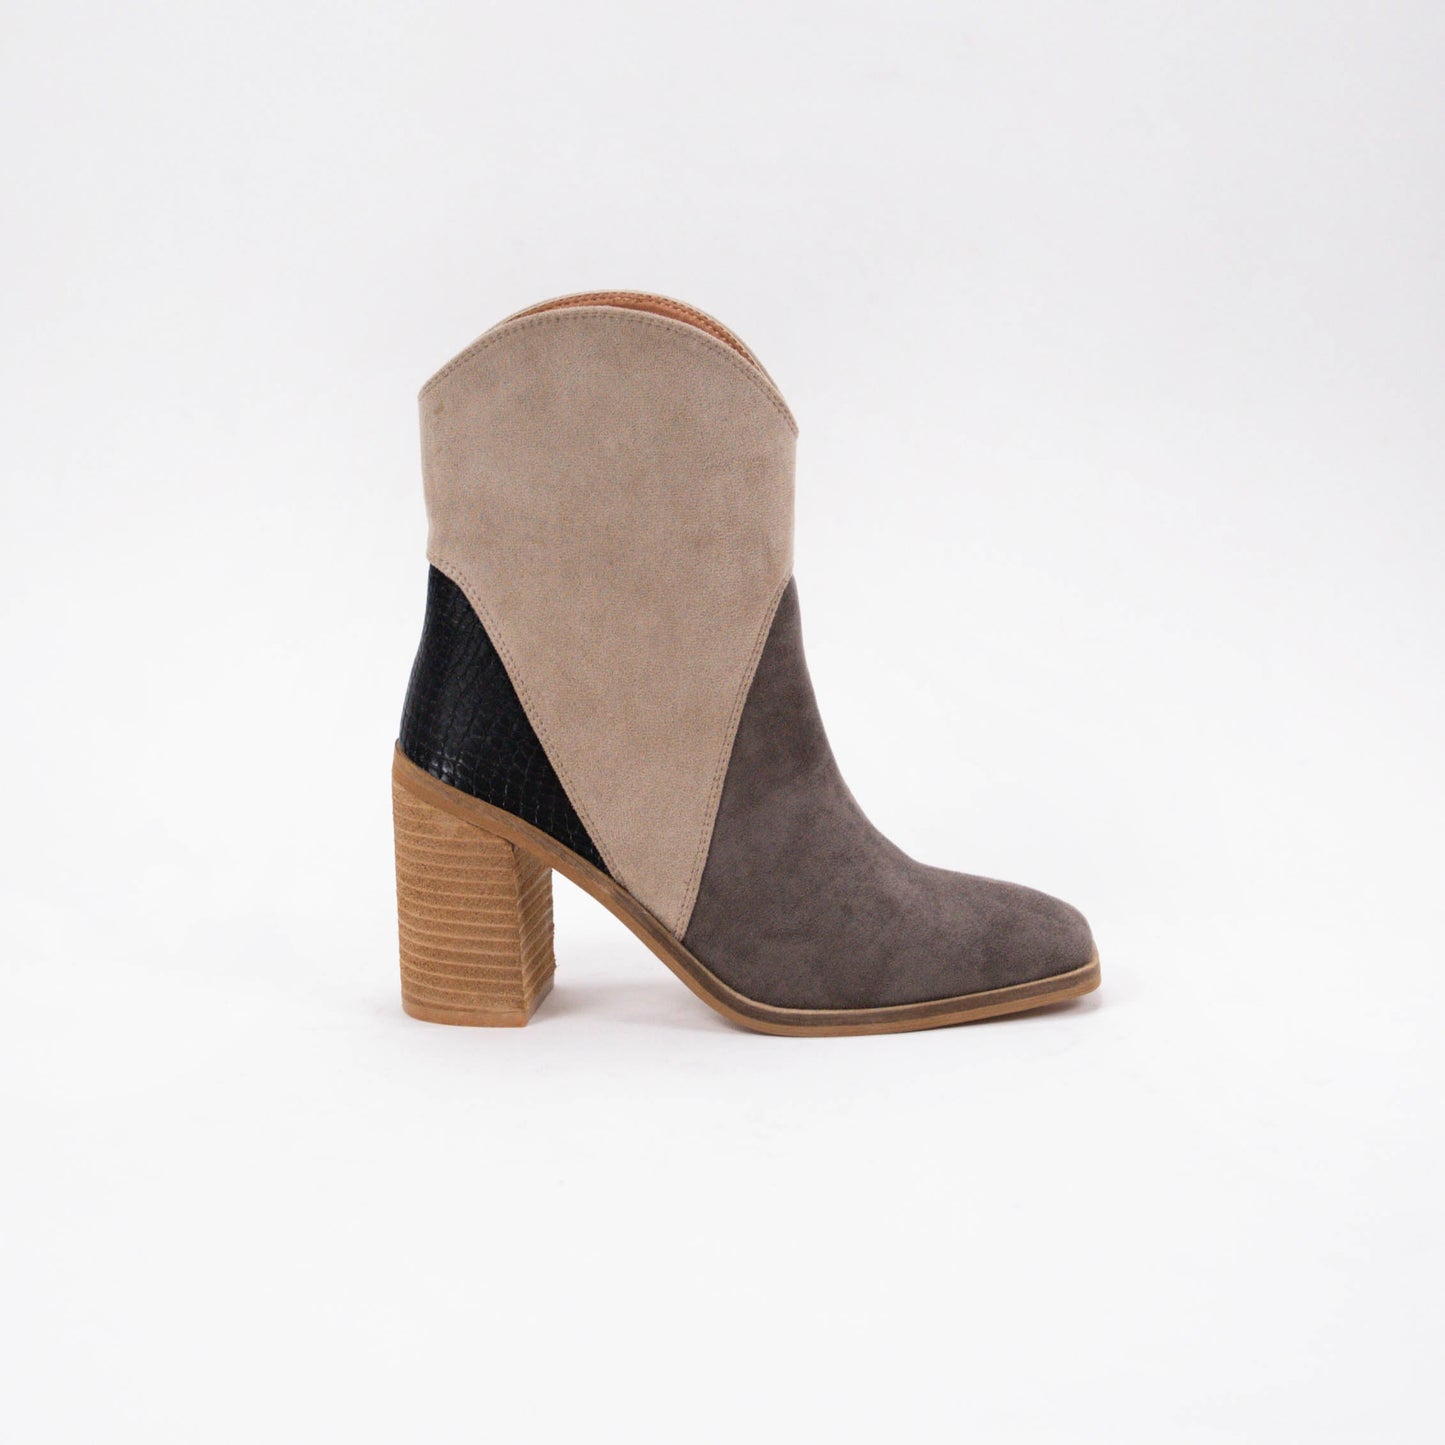 Kendall Tri-Tone Heeled Bootie